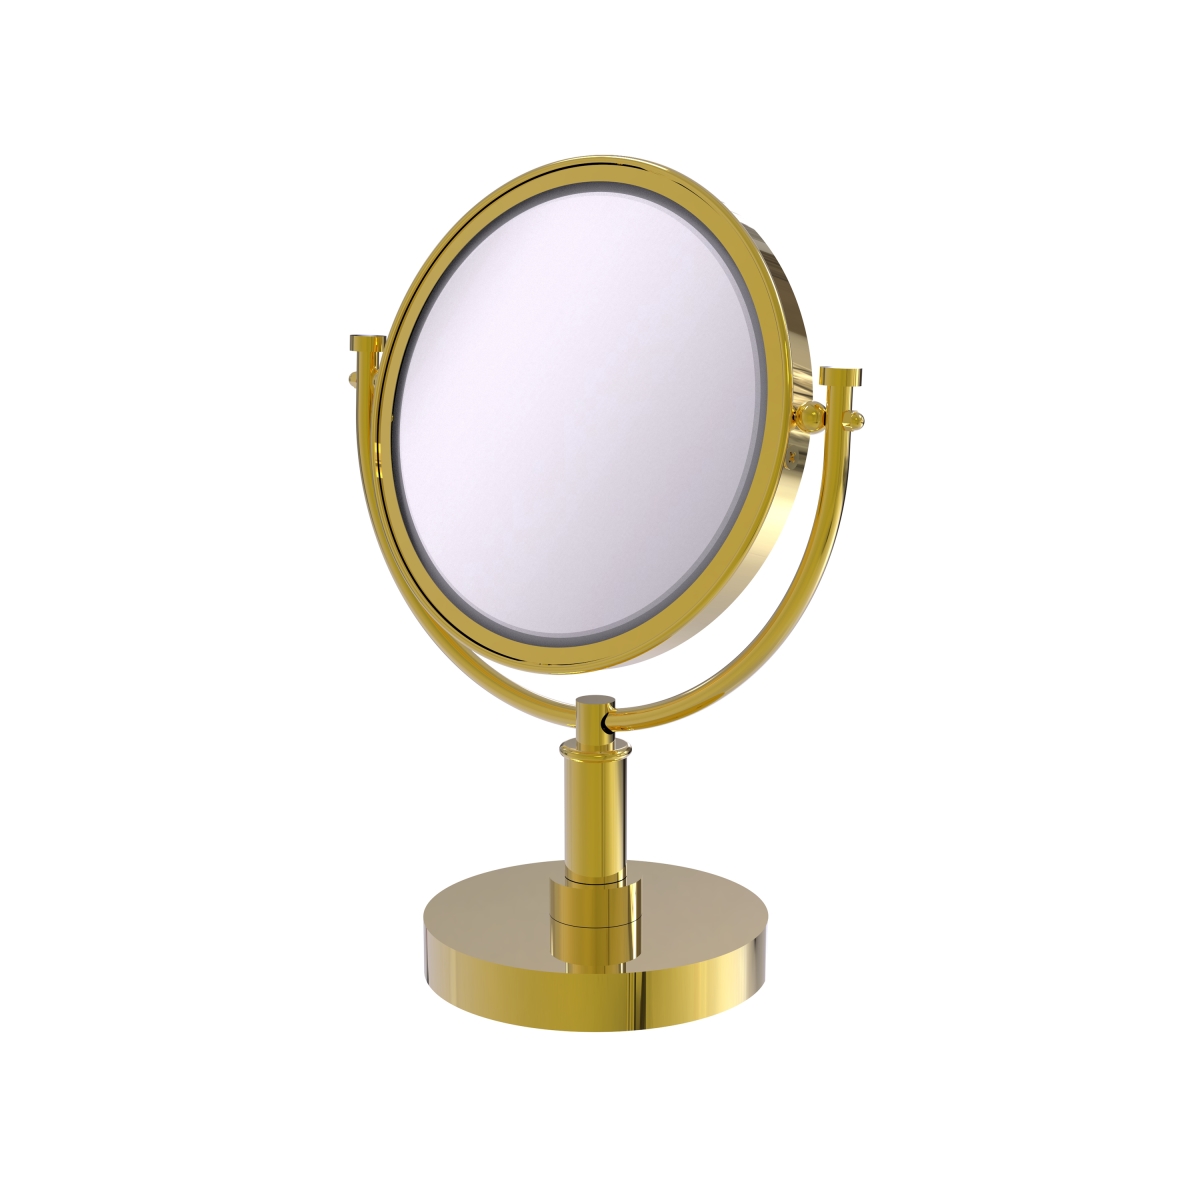 Dm-4-2x-unl Smooth Ring Style 8 In. Vanity Top Make-up Mirror 2x Magnification, Unlacquered Brass